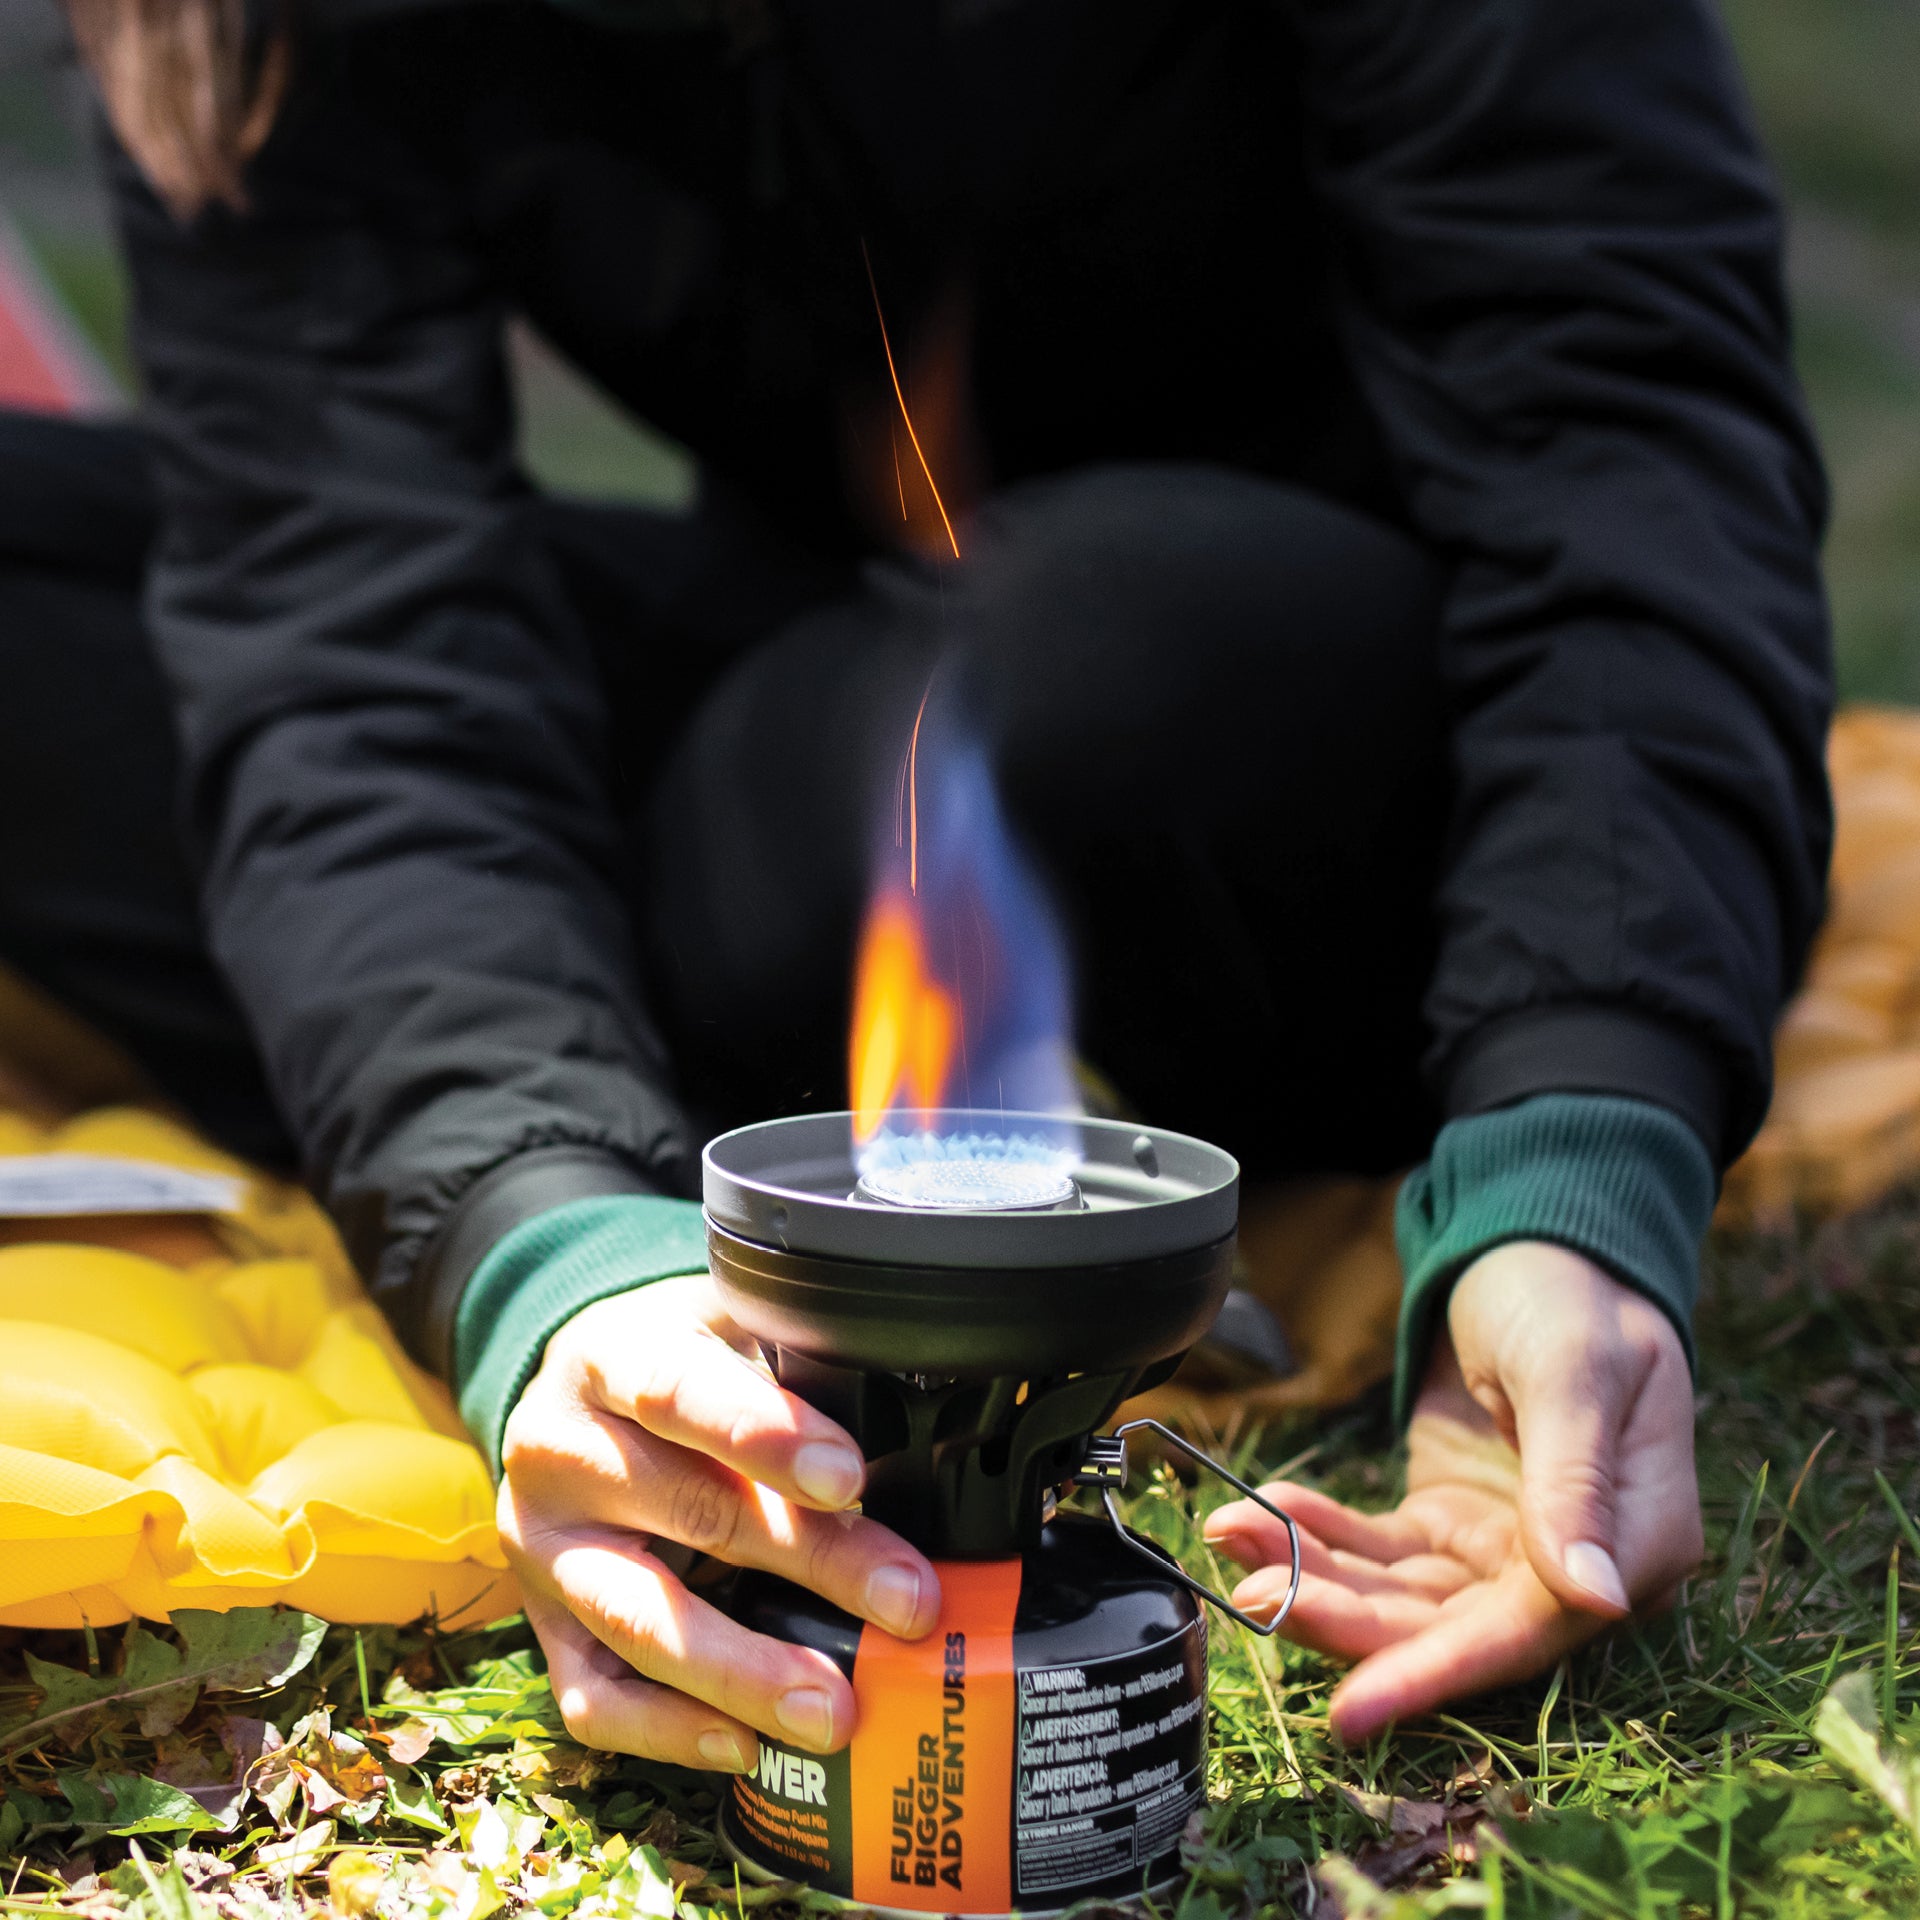 women lighting up a jetboil stove sitting on a inflated pad.